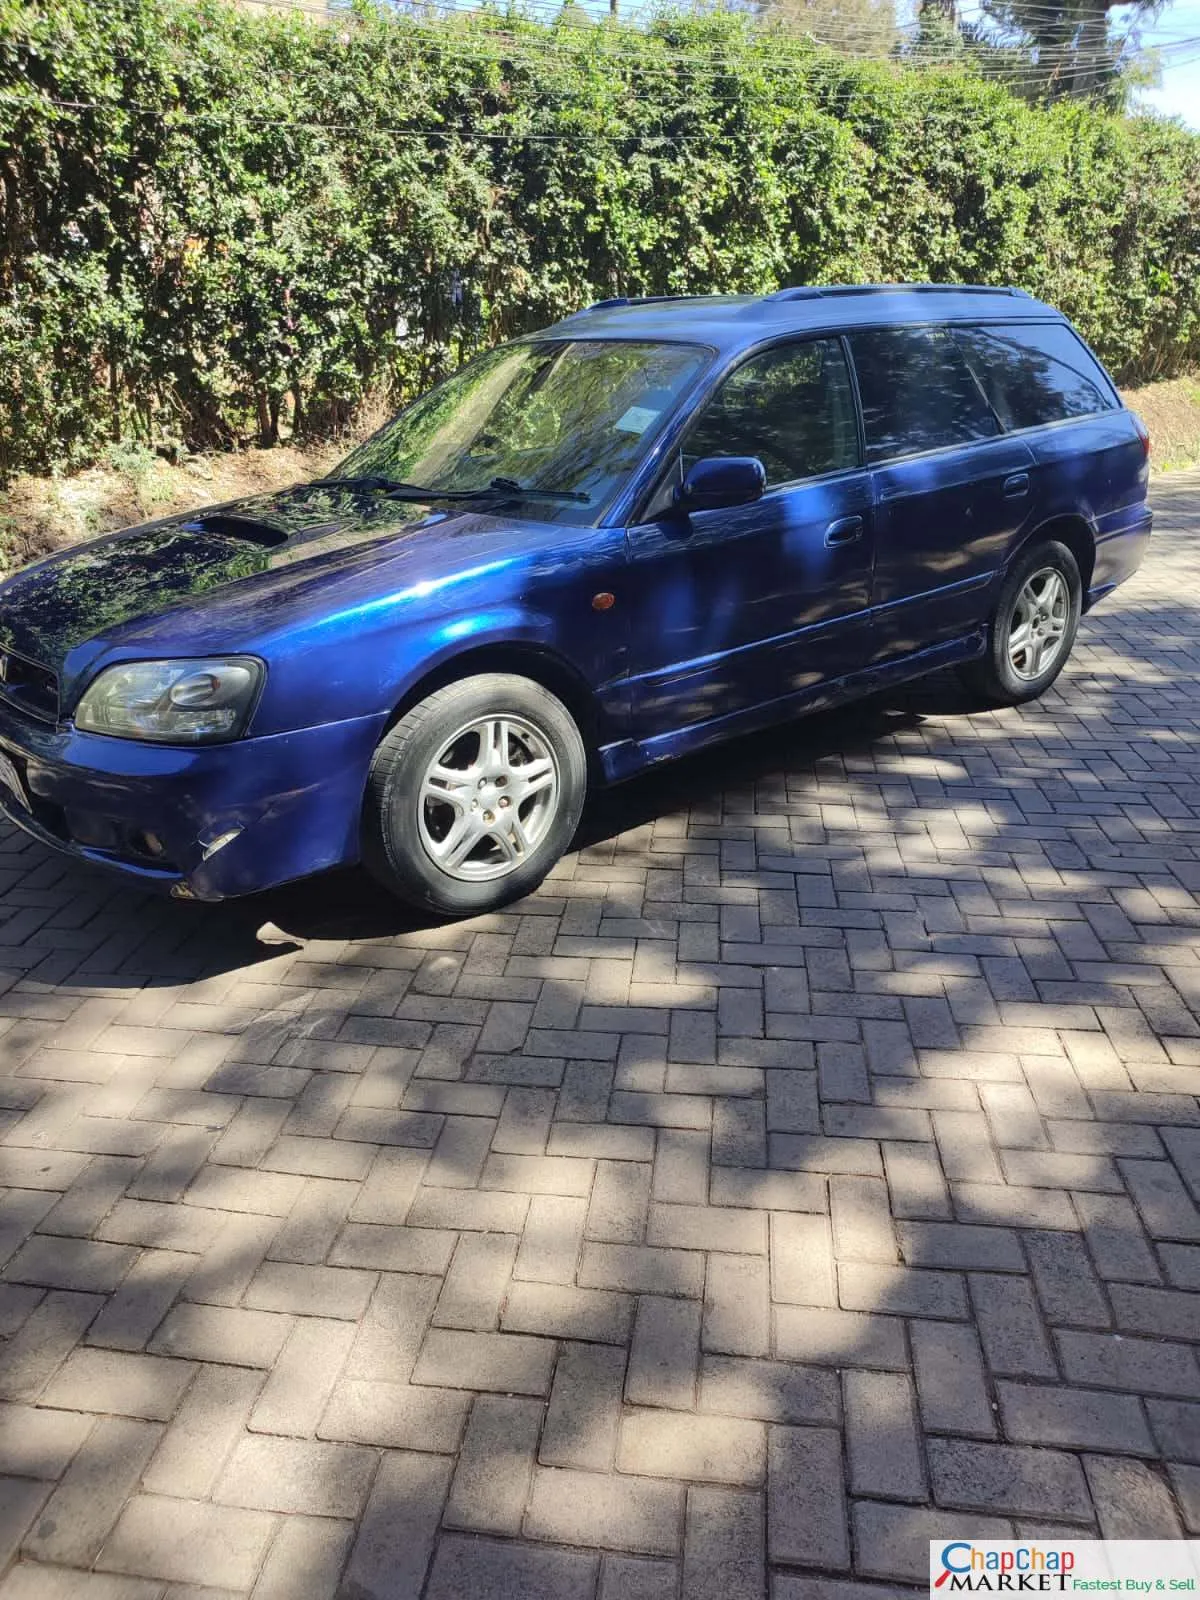 Cars Cars For Sale-Subaru legacy kenya bh5 You You pay 30% Deposit Trade in Ok Subaru legacy for sale in kenya hire purchase installments EXCLUSIVE 9